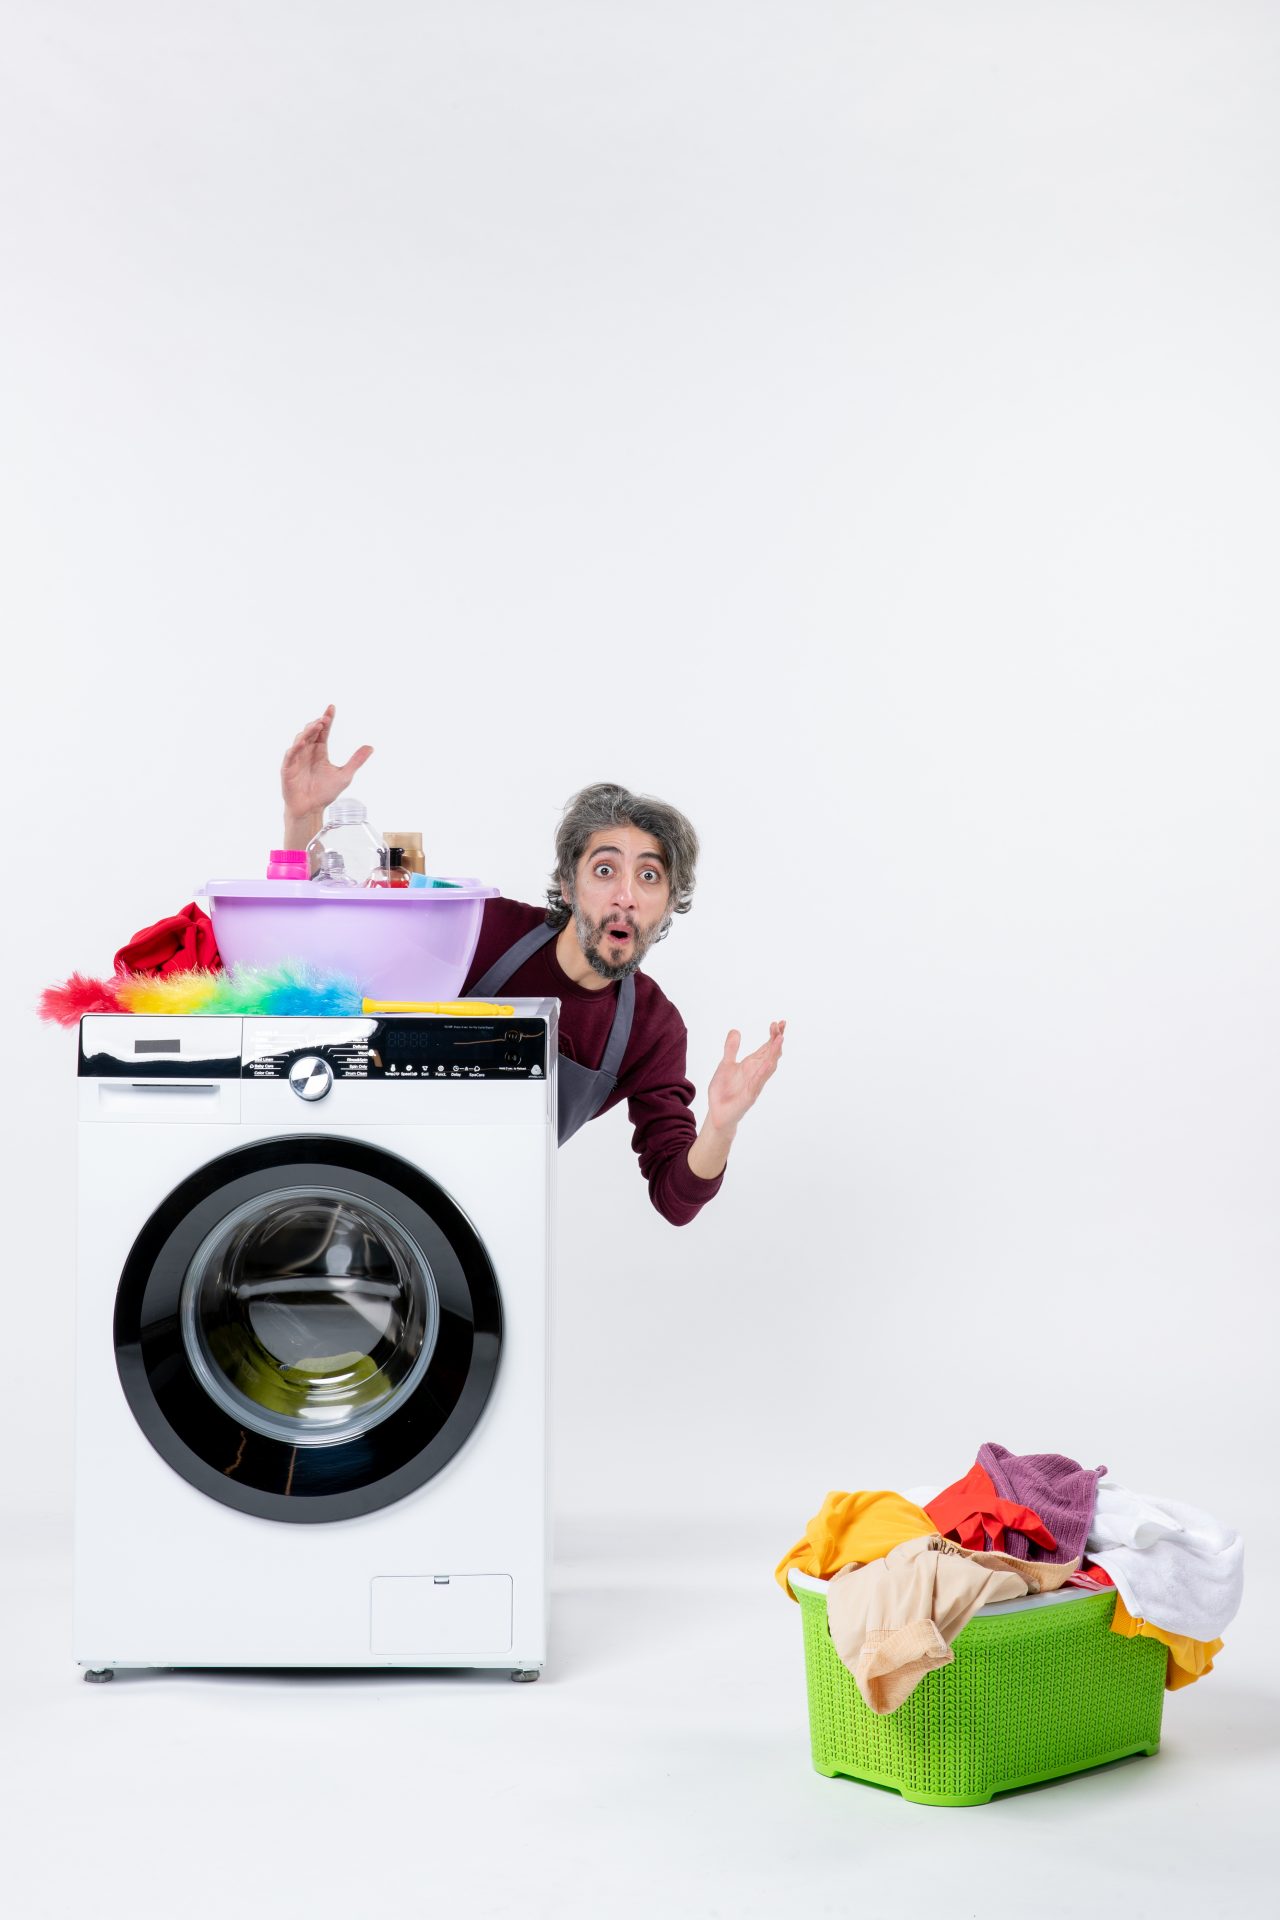 Can the Magnetic Laundry System Really Revolutionize Your Laundry Routine?